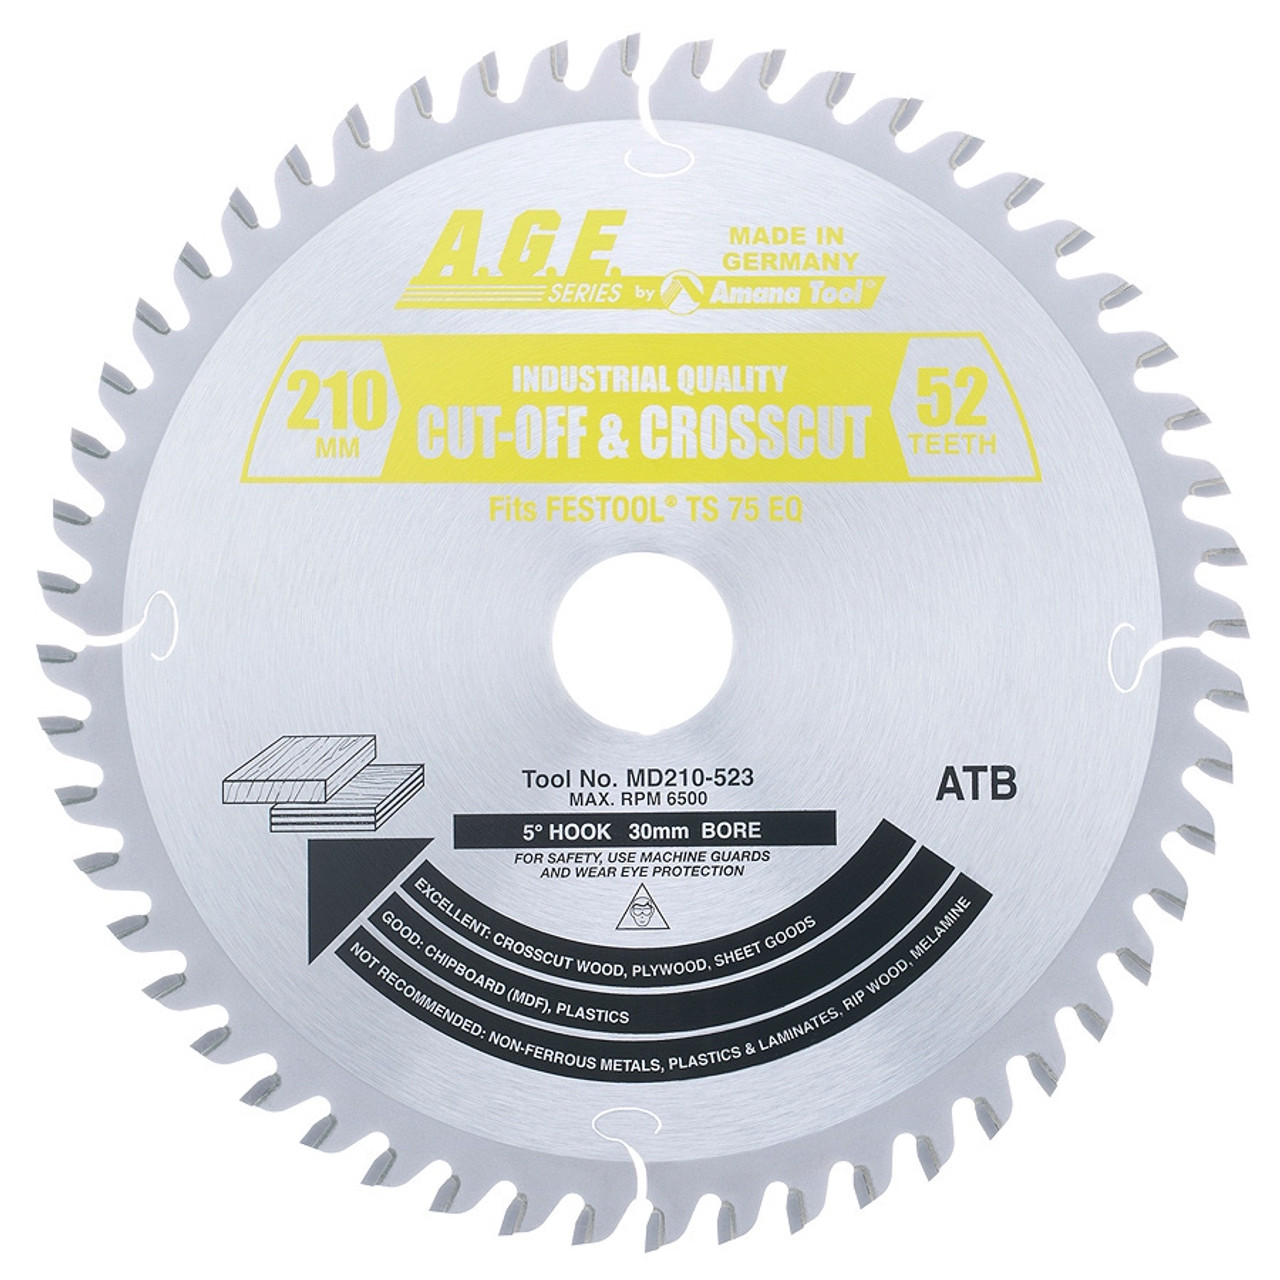 AGE Series MD210-523 For Festool Track Saw Machine Carbide Tipped Saw Blade  210mm D x 52T ATB, 15 Deg, 30mm Bore for Fine Crosscuts in Sheet Goods,  Melamine